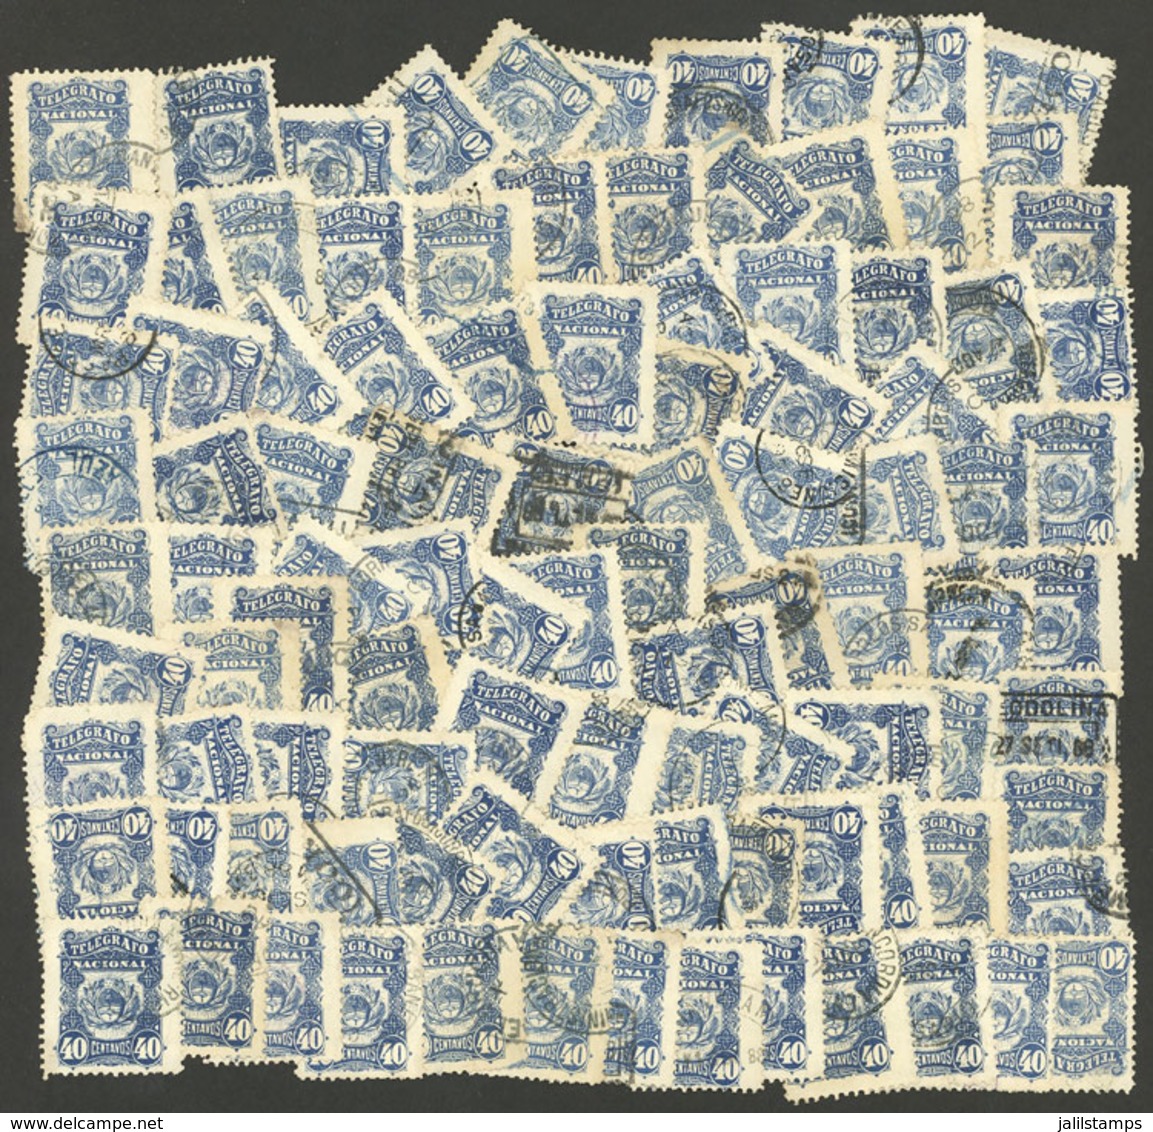 ARGENTINA: GJ.3, Province Of Buenos Aires 40c. Blue (type A), Lot Of 100 Used Stamps, Varied Cancels (some Scarce), Shad - Telegraph